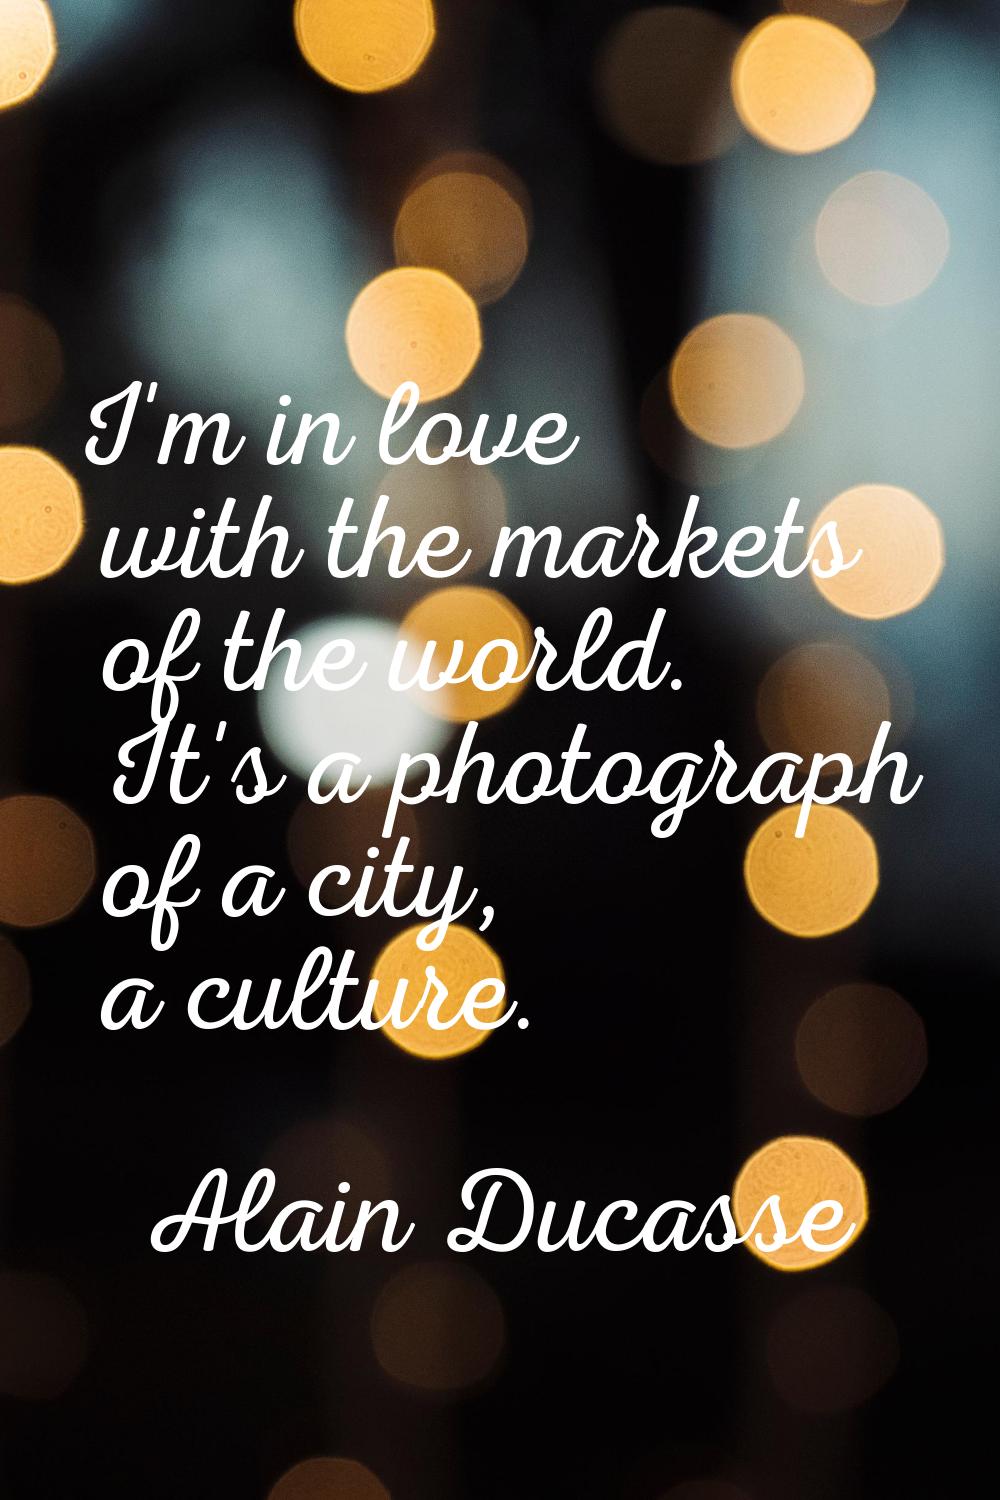 I'm in love with the markets of the world. It's a photograph of a city, a culture.